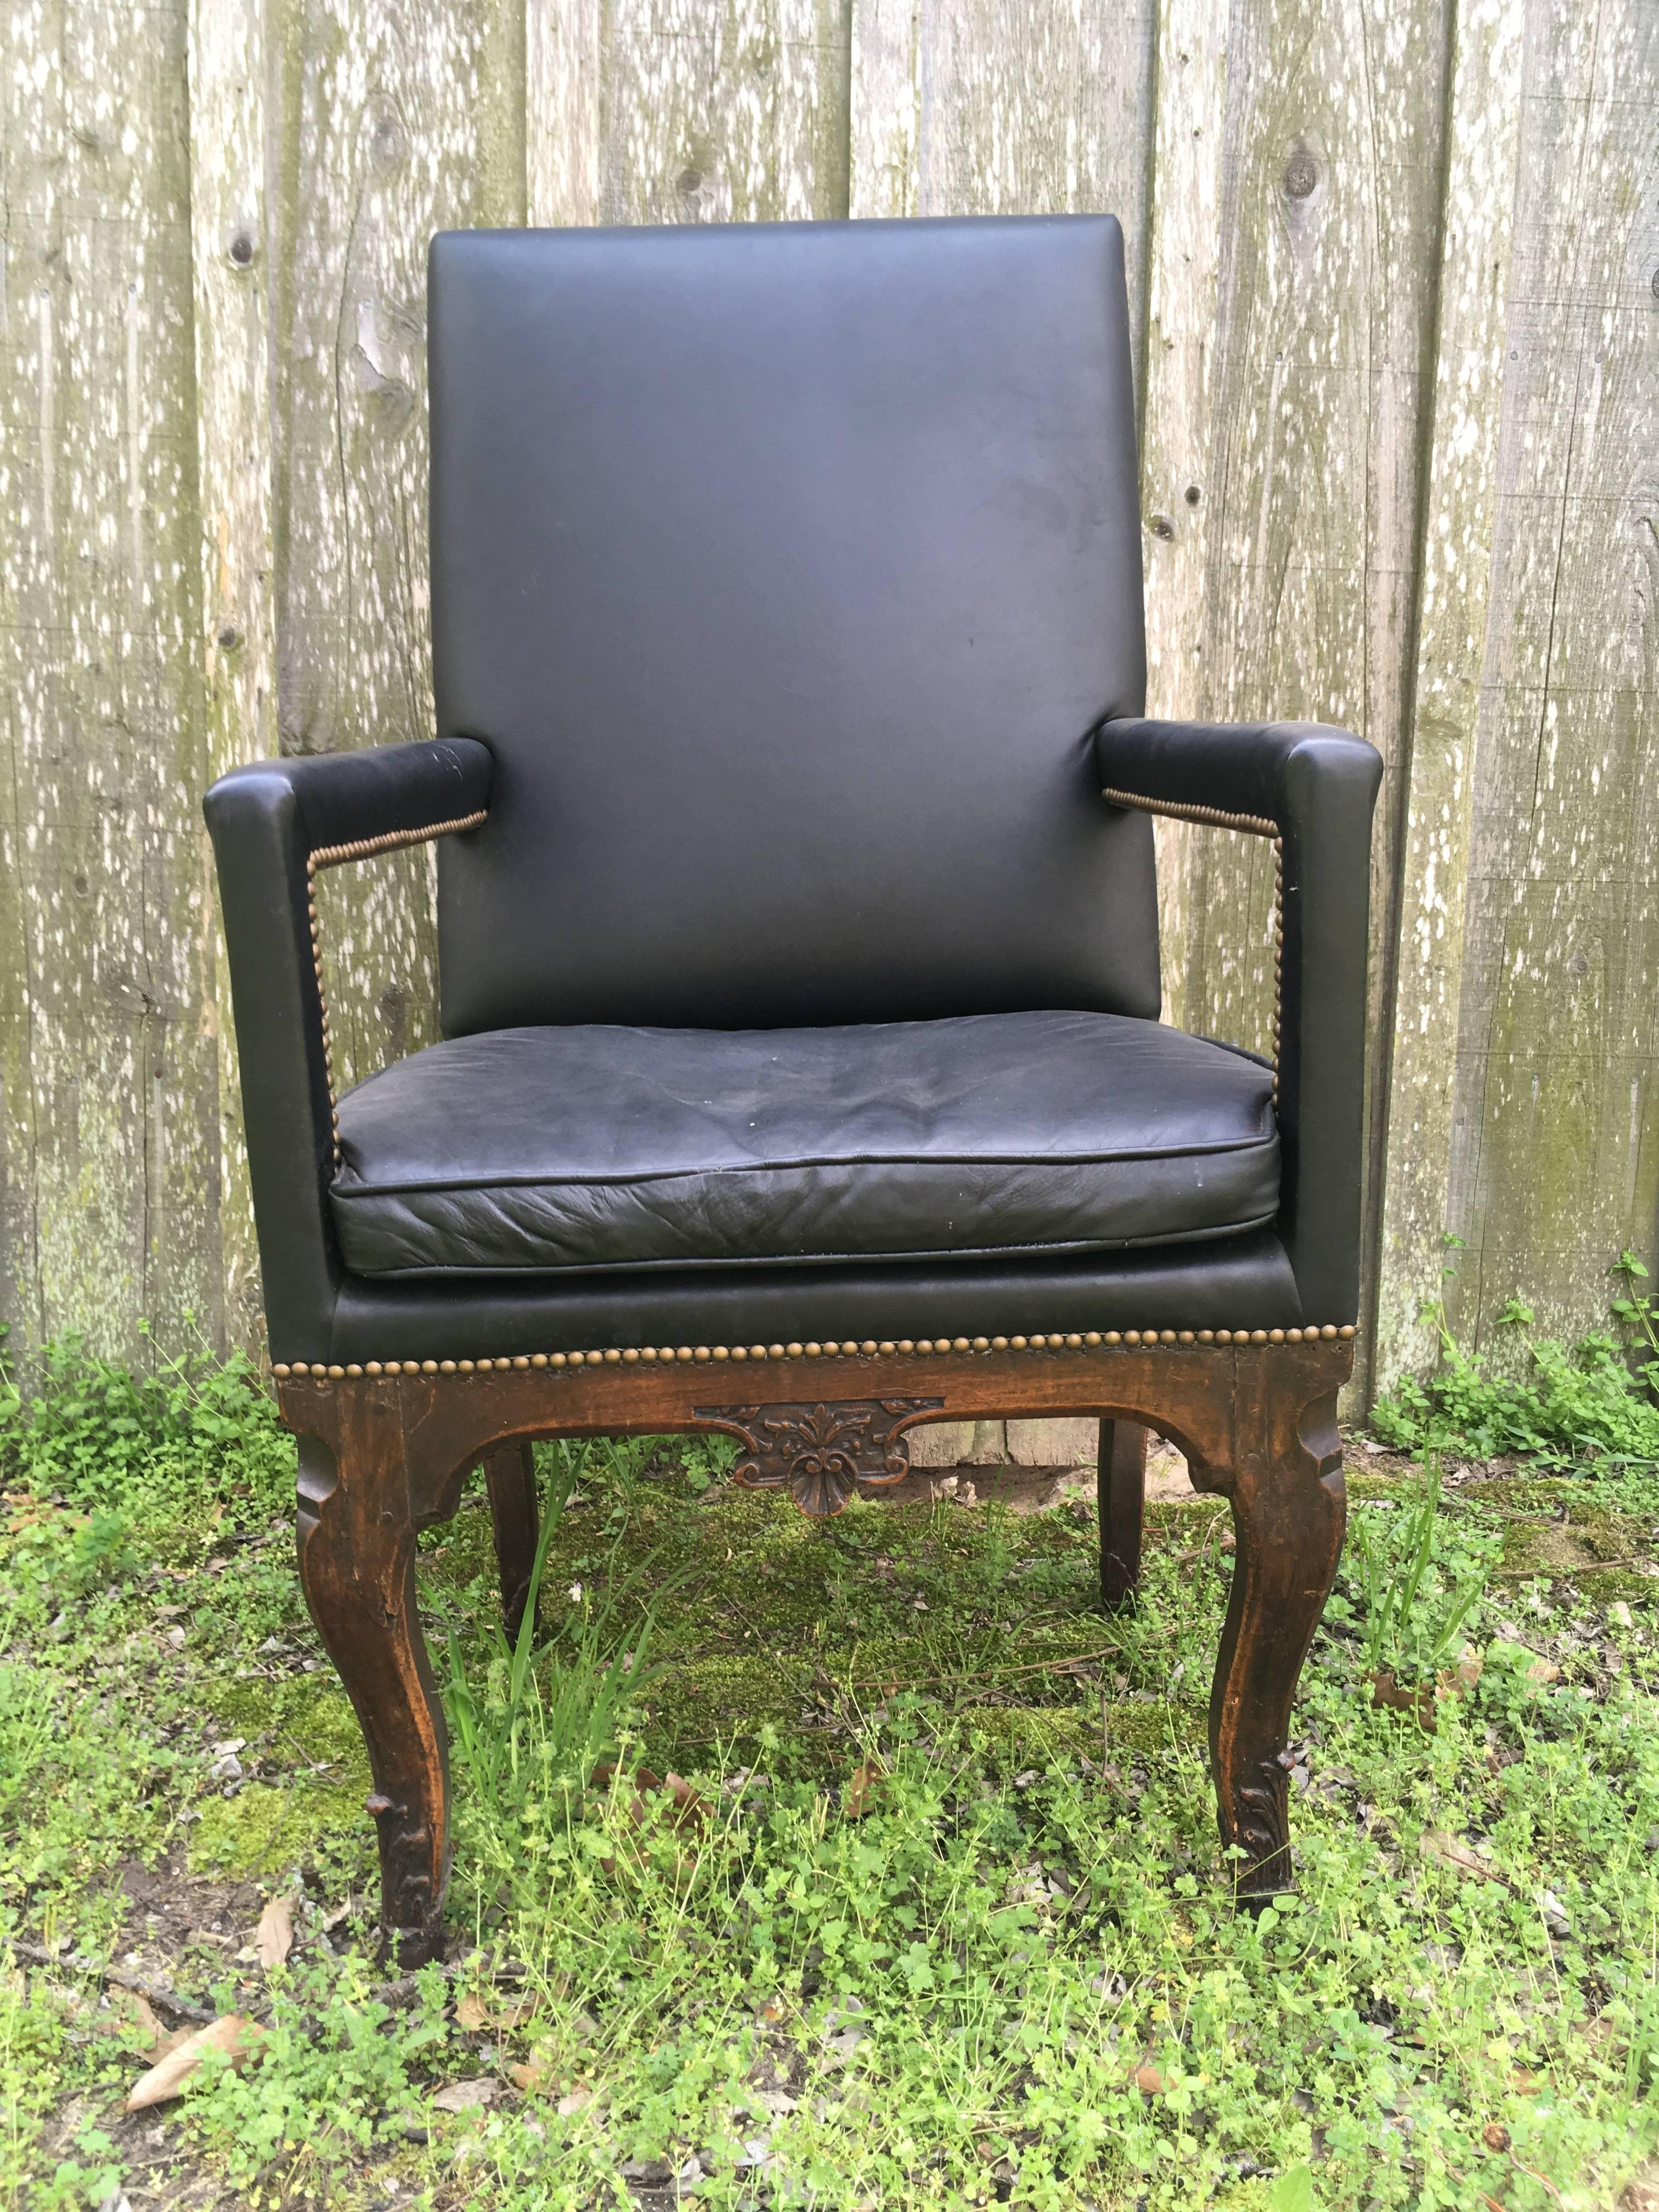 A French Regence period armchair in carved walnut with a very tall back and seat. 
This chair is ideal for a tall person.